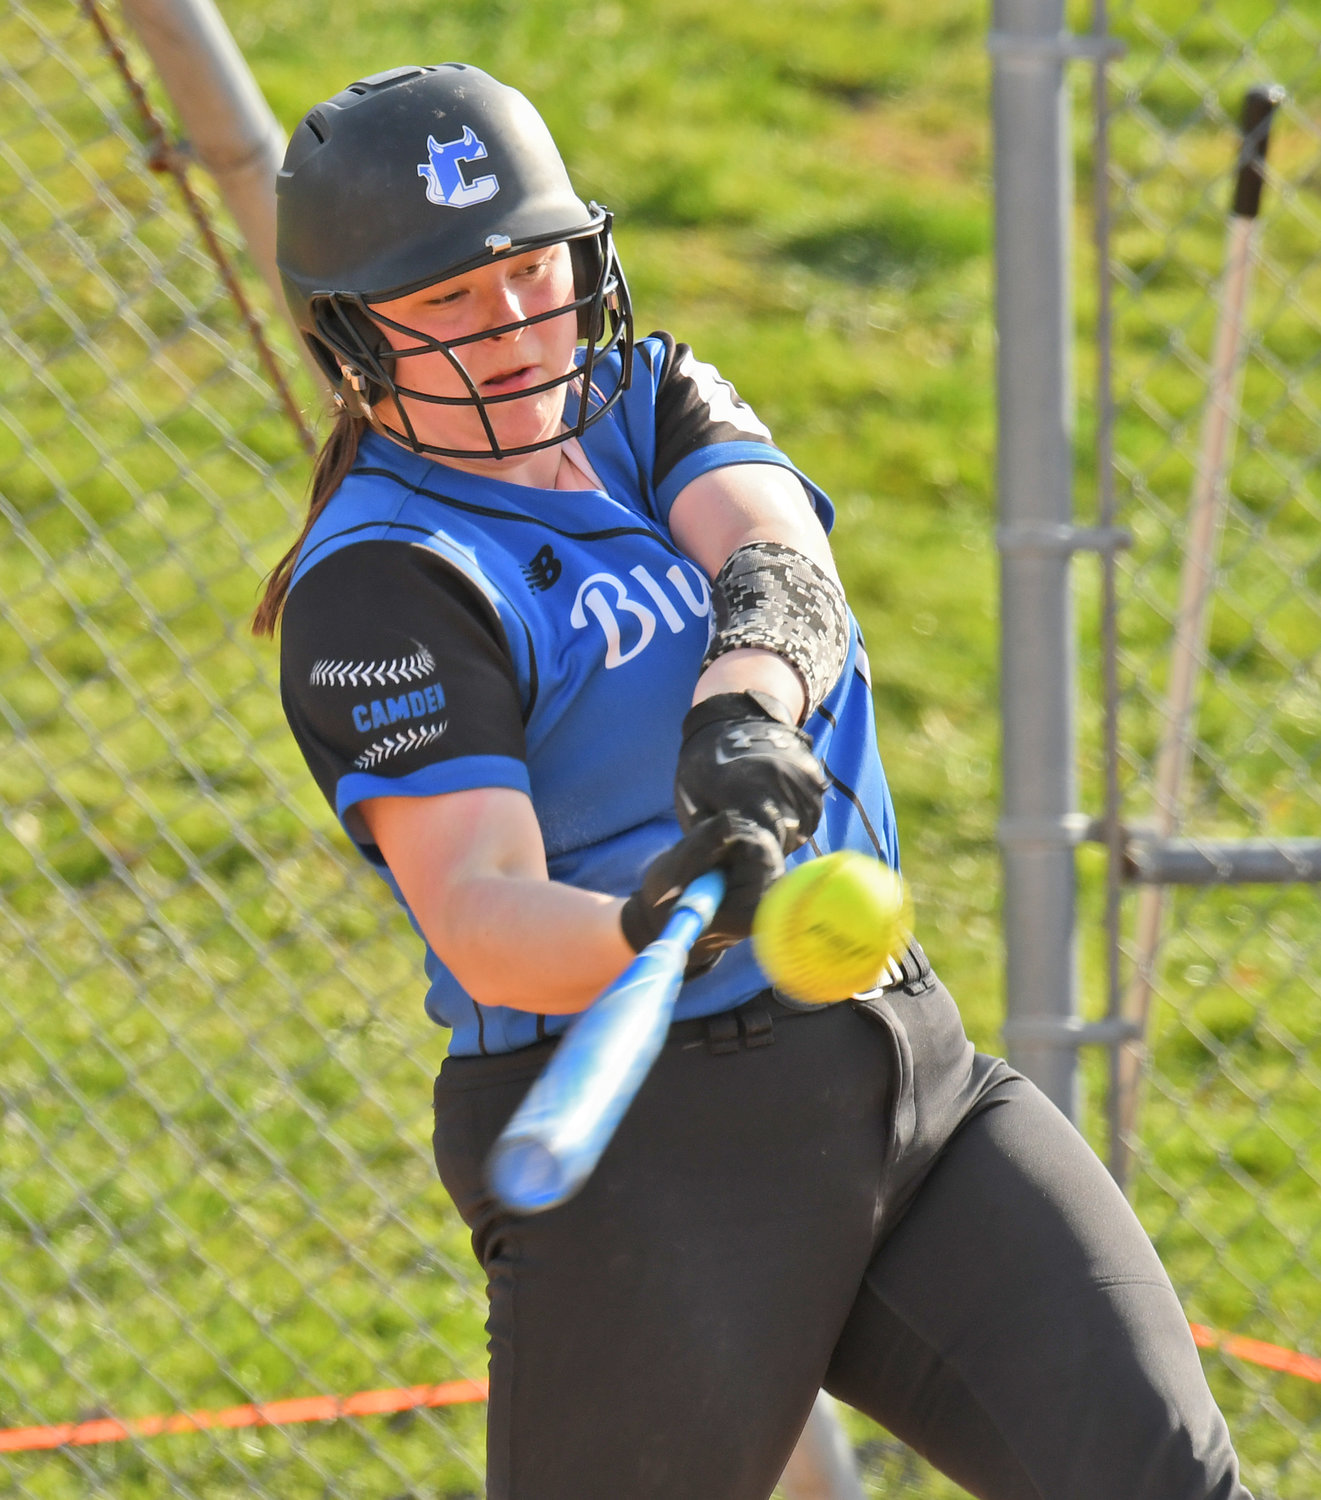 BLAST OFF — Camden junior catcher Kaitlyn Findlay makes contact in a game earlier this season. She's helped lead the team to a 7-0 start in pursuit of a Tri-Valley League title the season after the Blue Devils shared the title with Oneida.